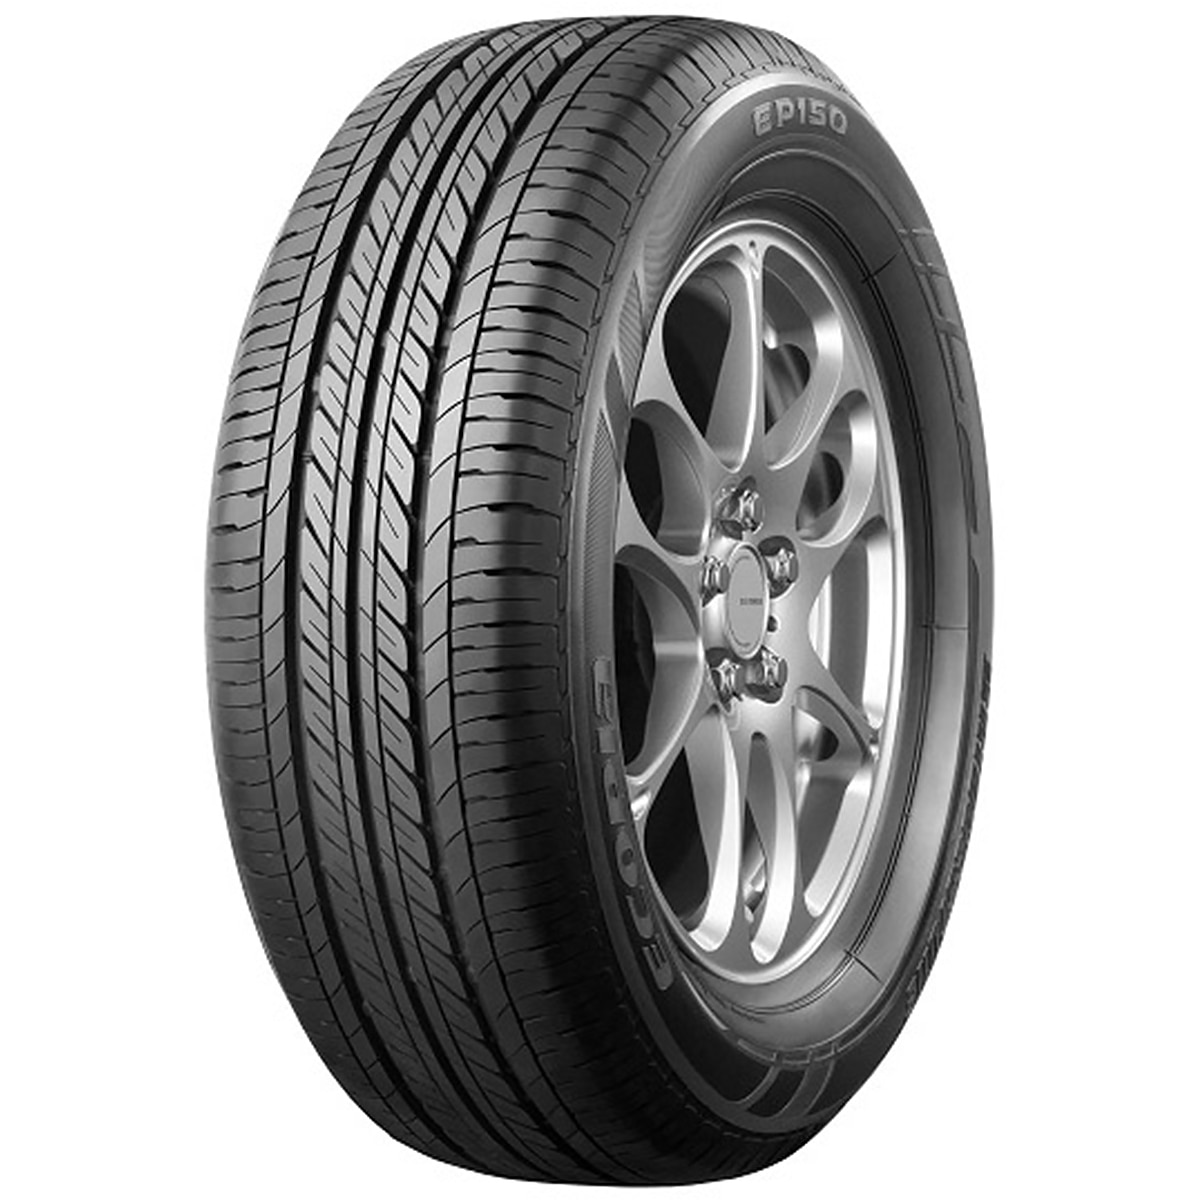 175/70R13 82H BS EP150 - Tyre